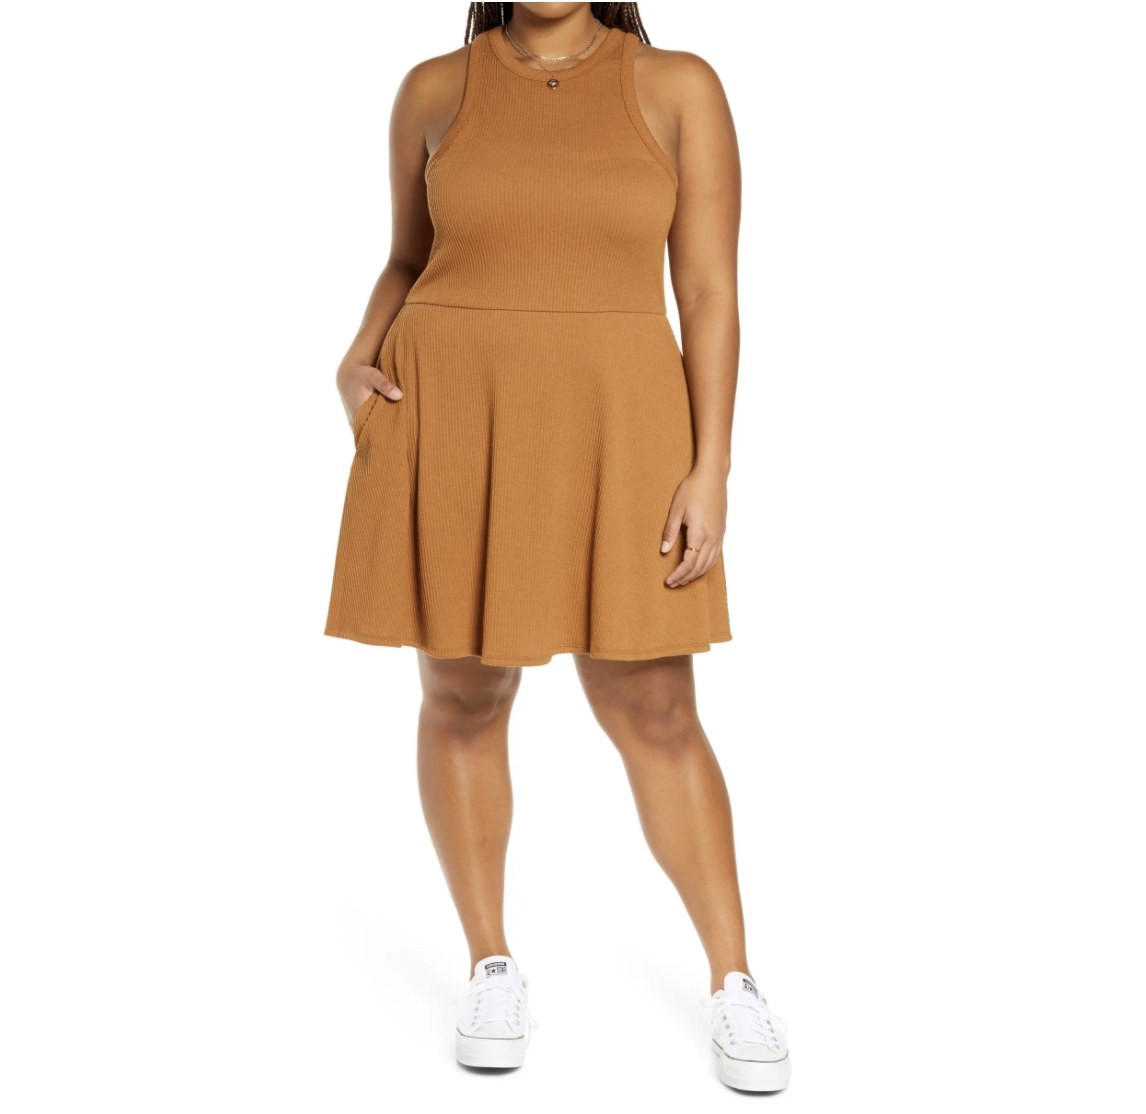 Model is wearing a tan dress and white sneakers